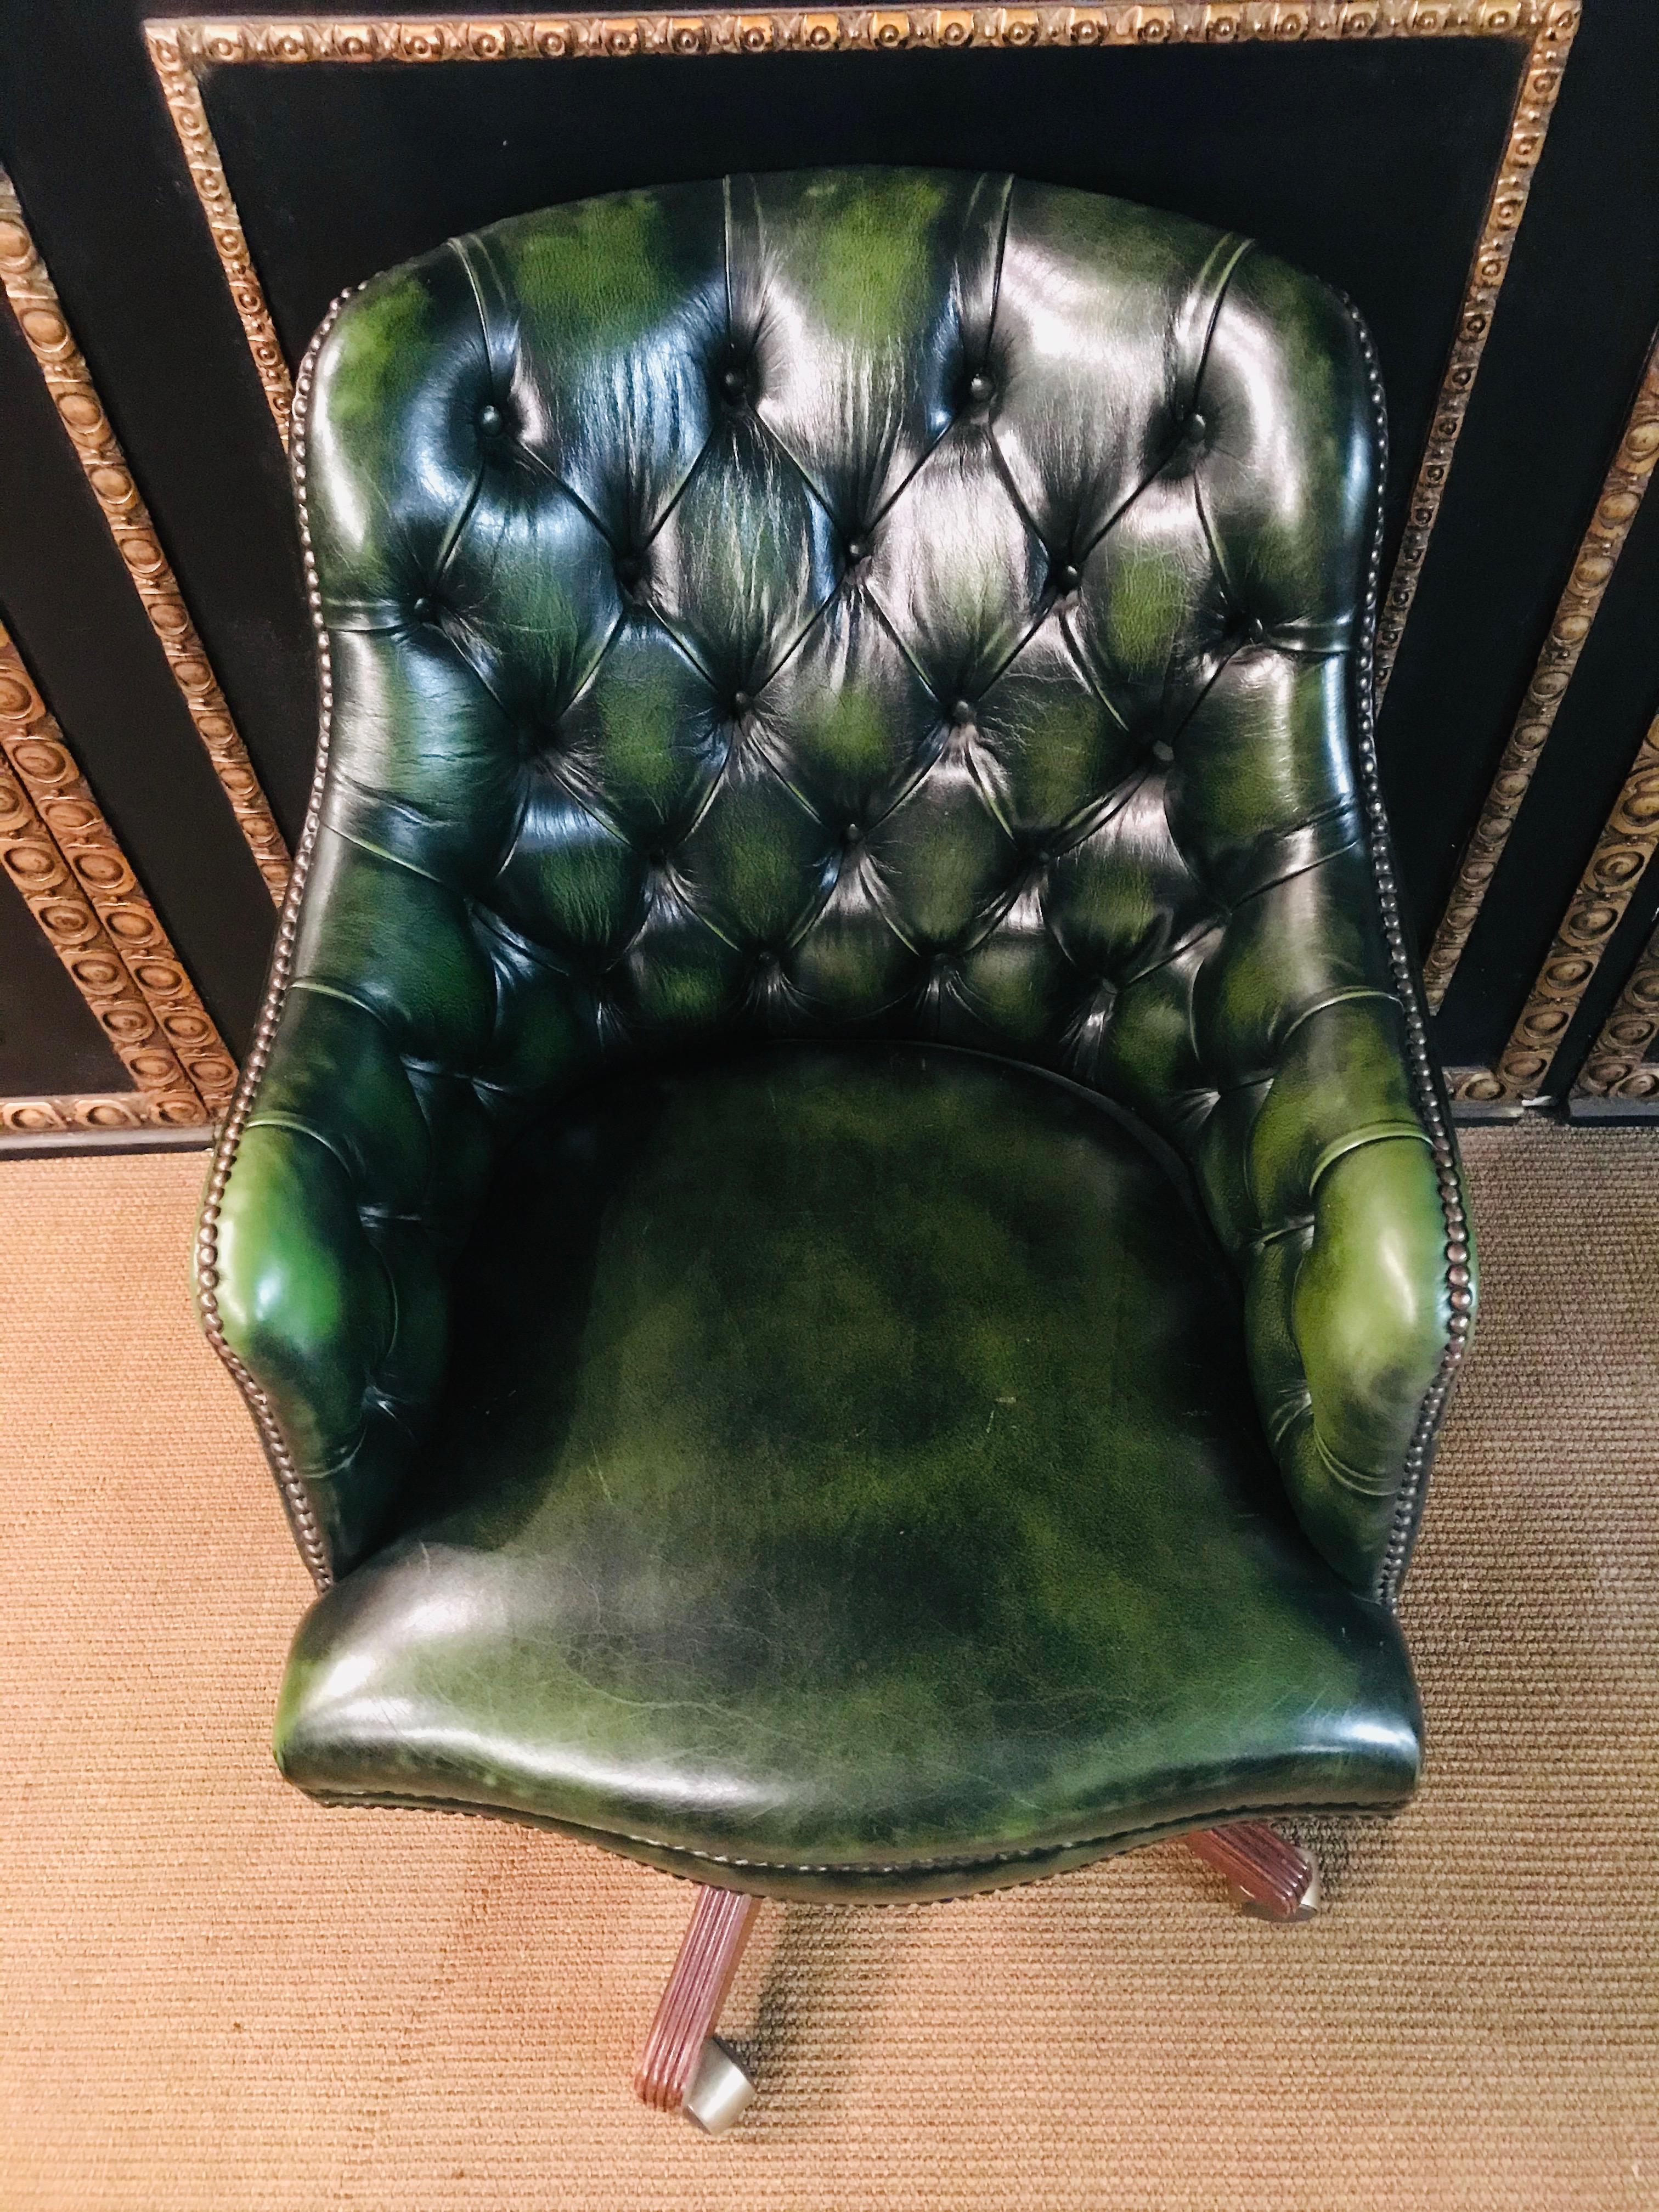 green leather chesterfield office chair